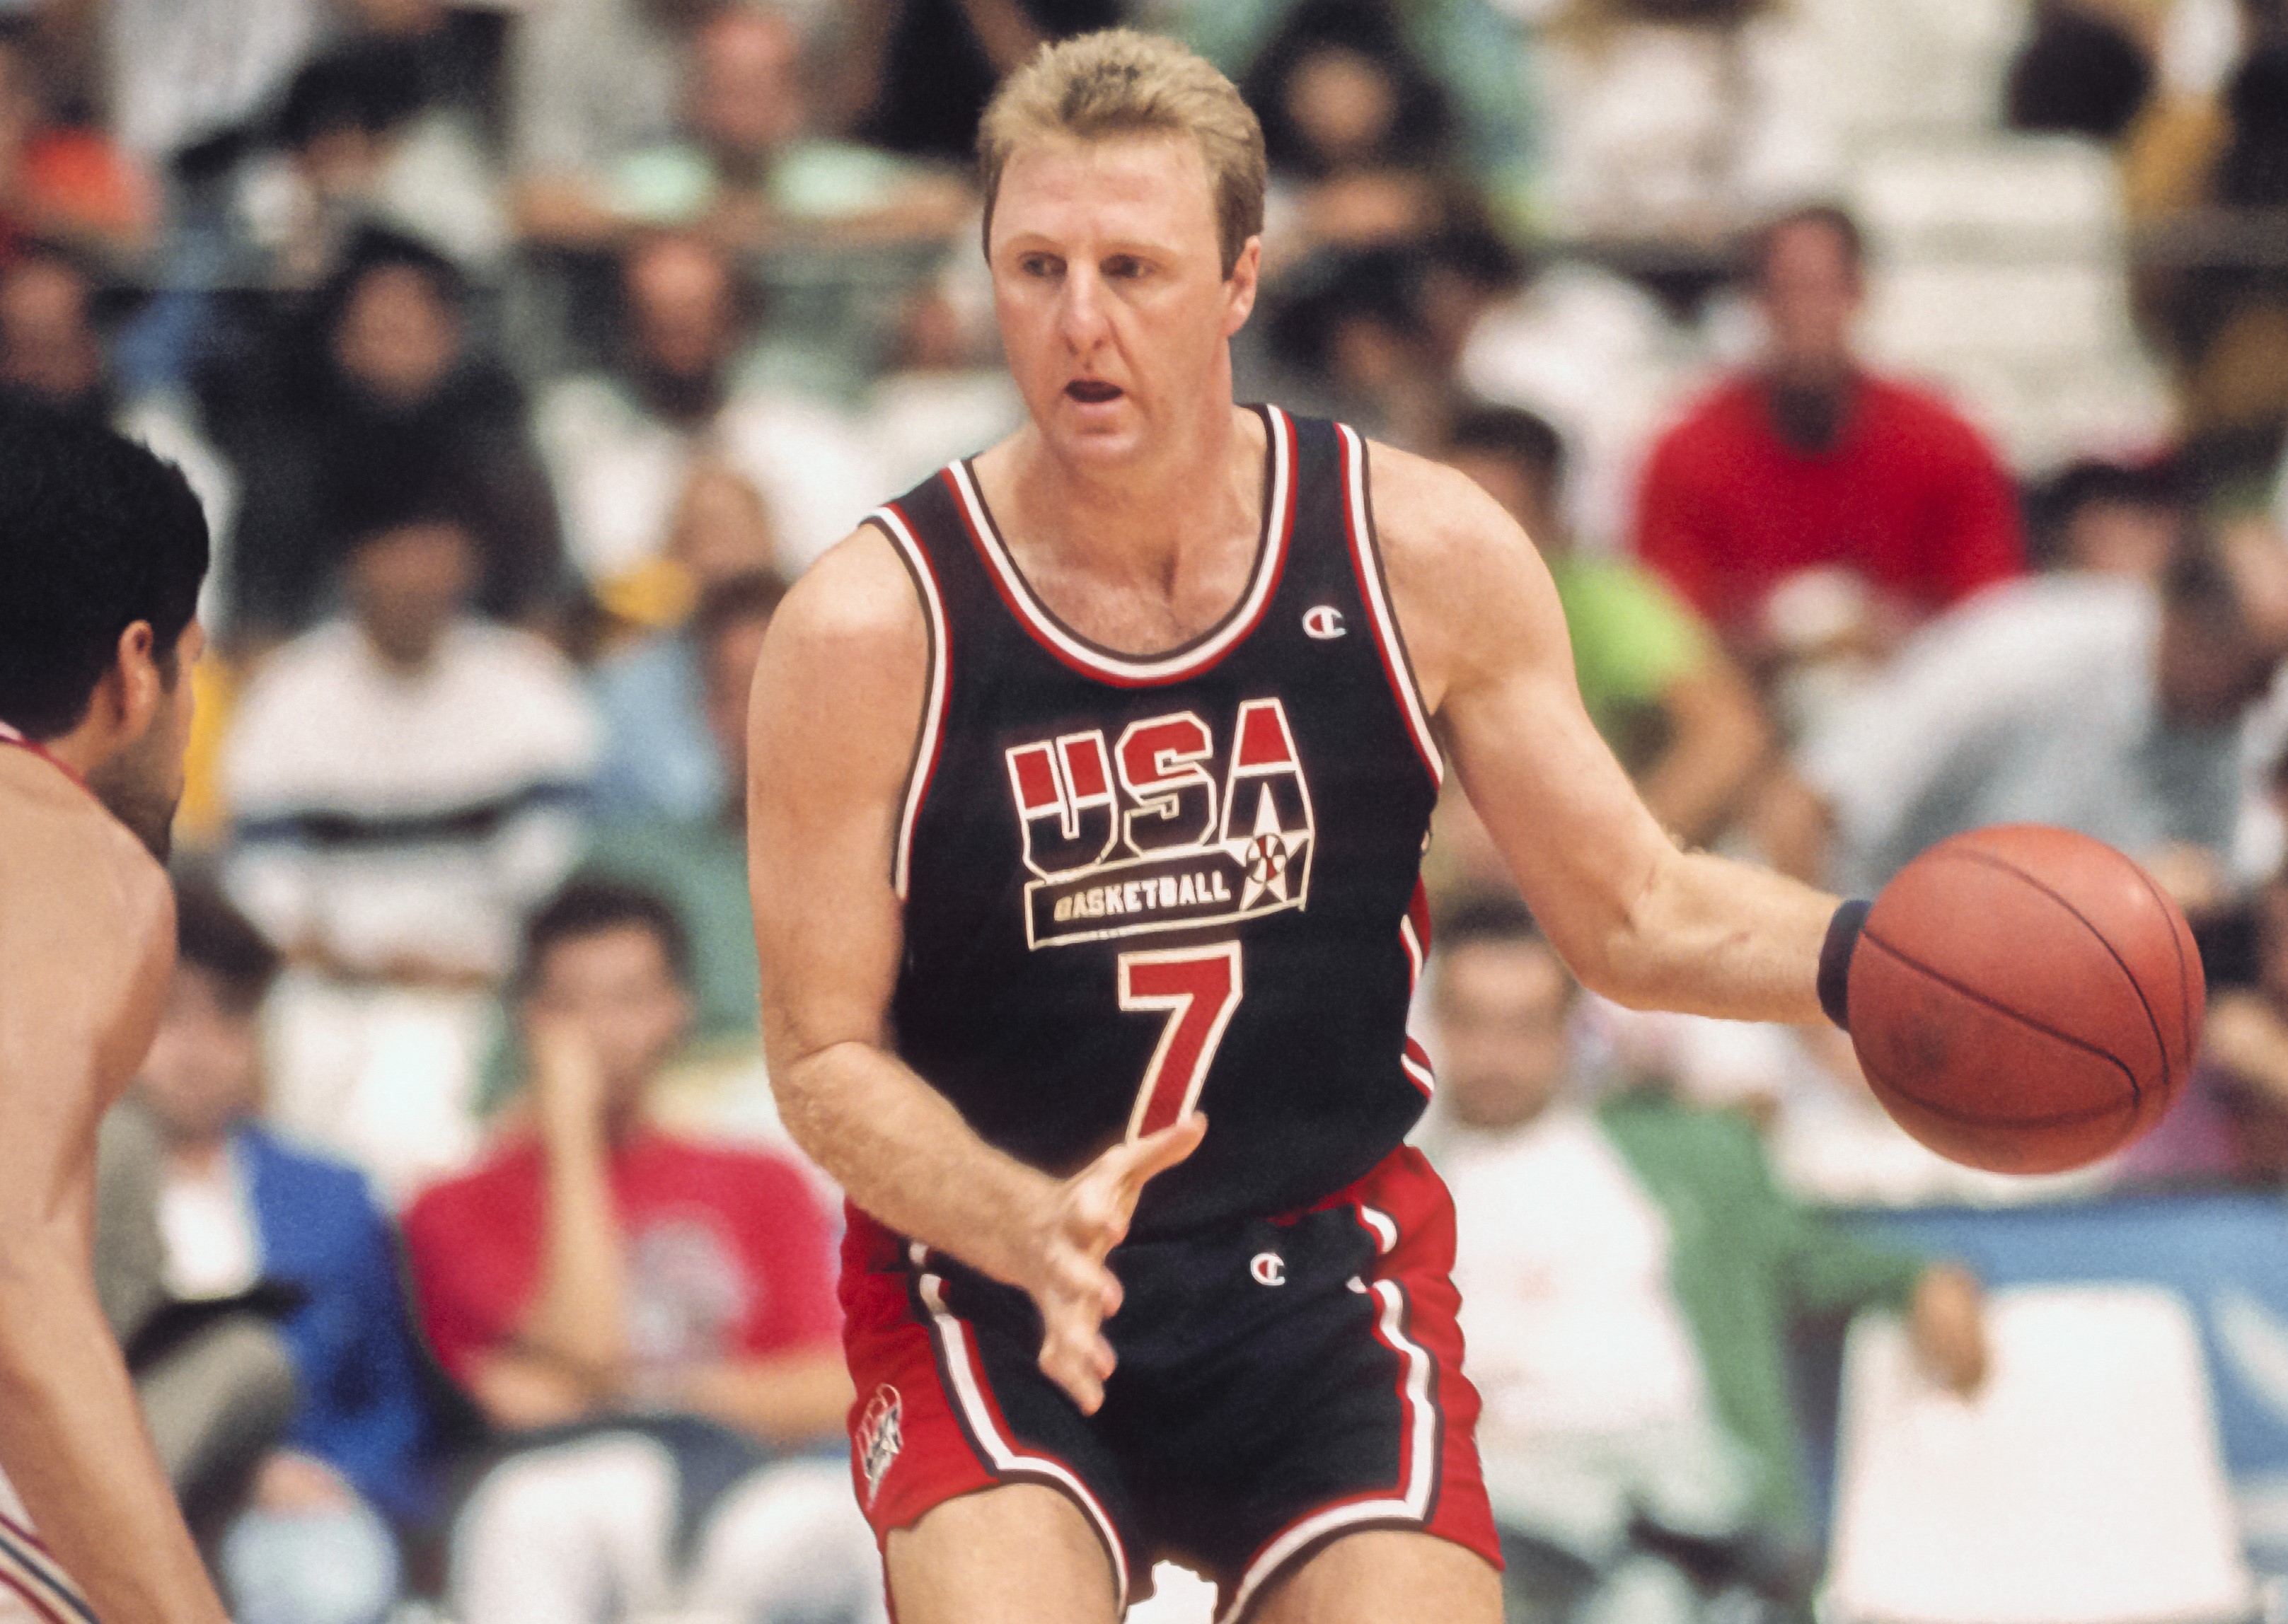 With Michael Jordan & Co. On Hand, Larry Bird Had the Perfect